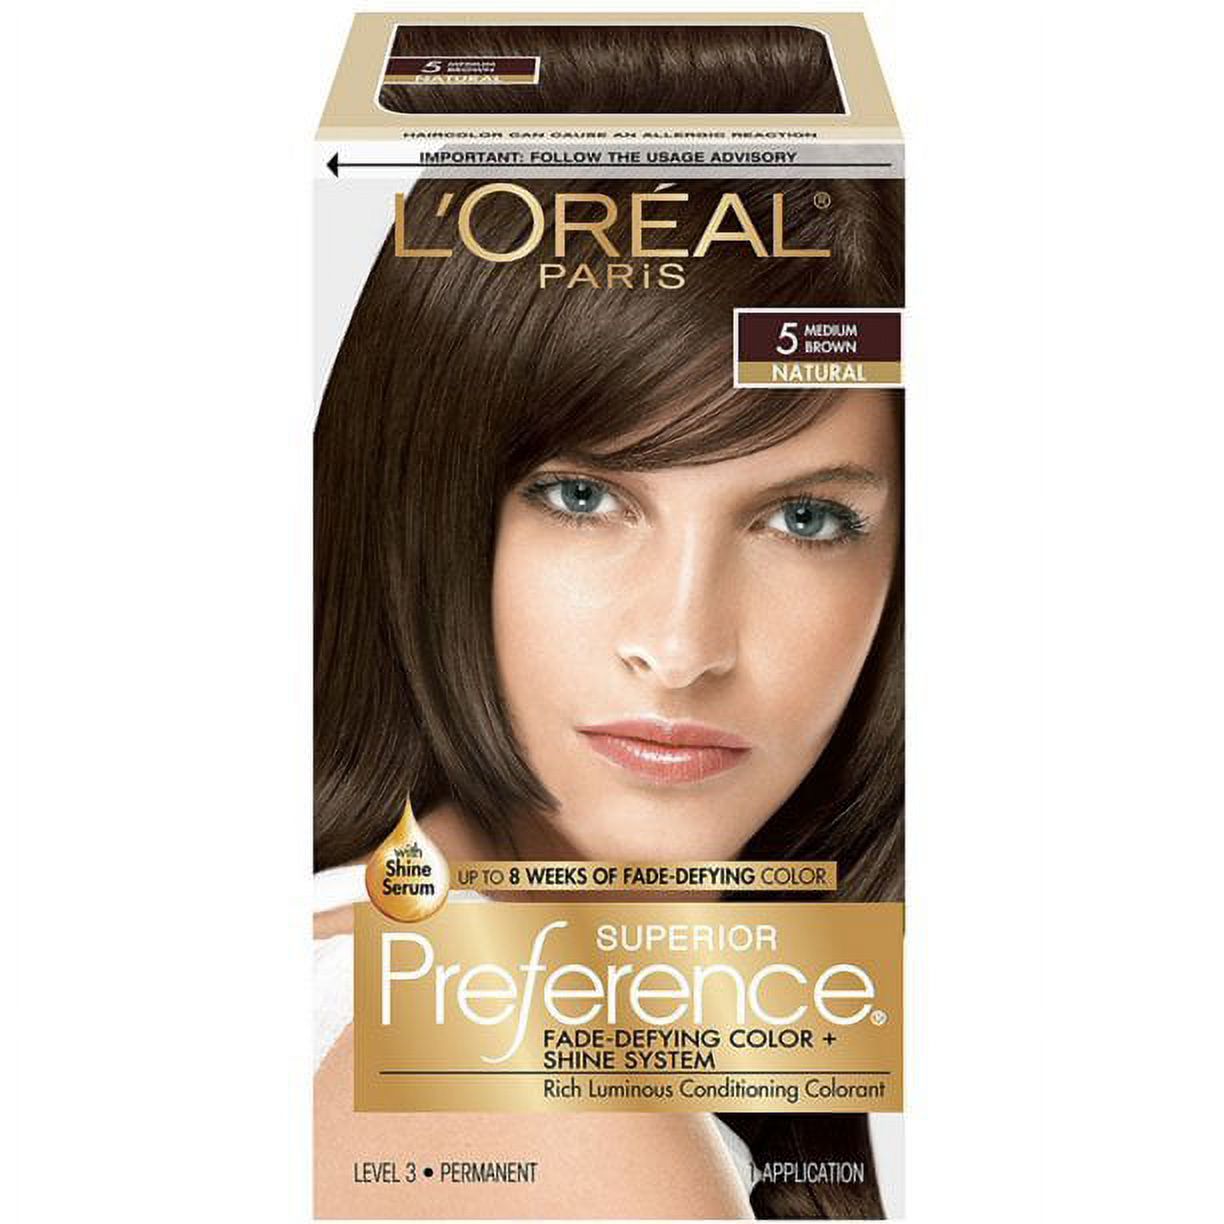 L'Oreal Paris Superior Preference Permanent Hair Color, 5 Medium Brown, 1 Each - image 5 of 7